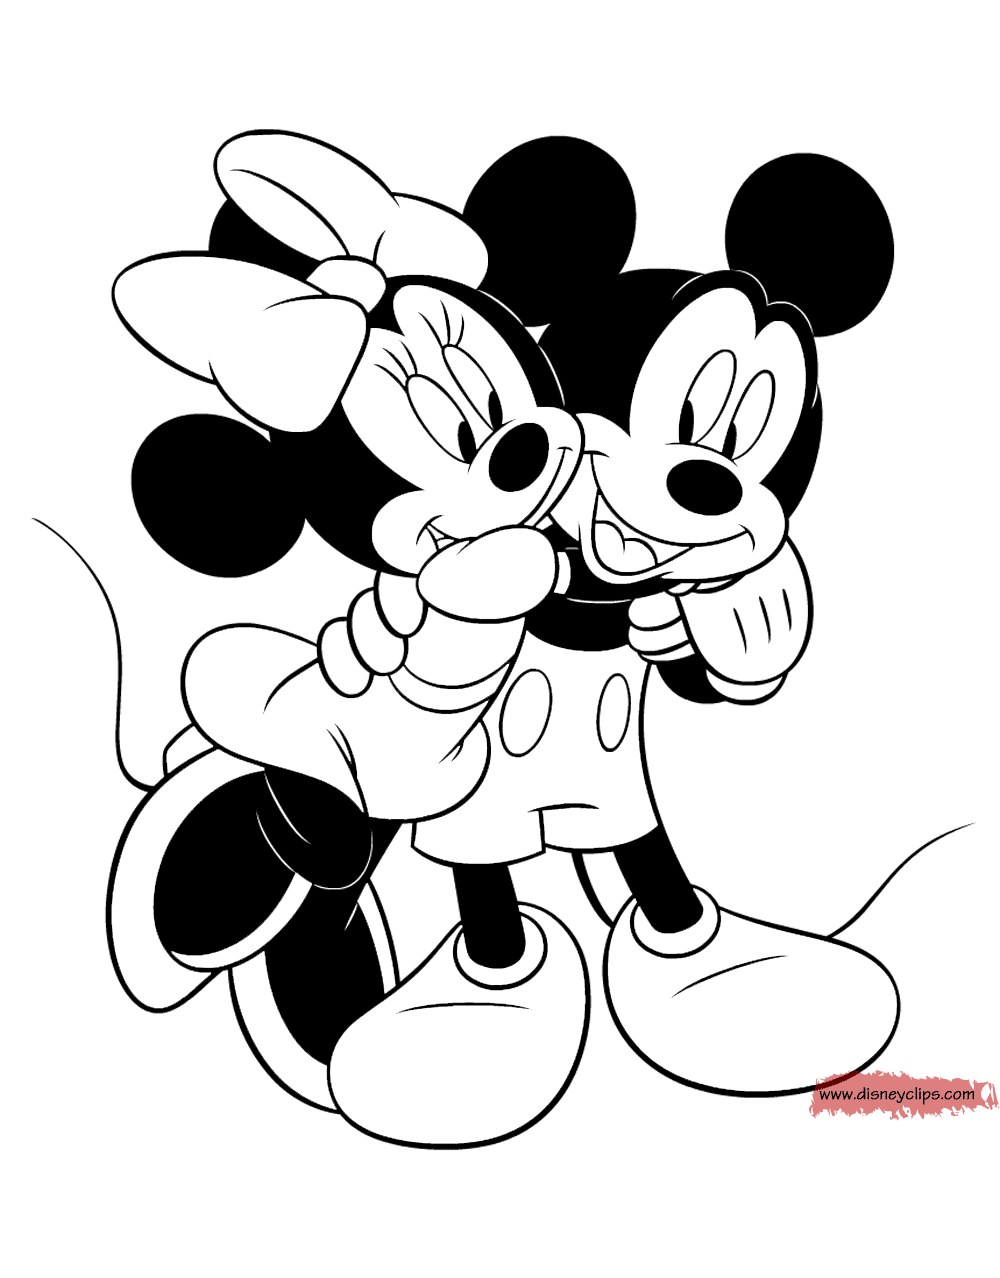 Download Mickey Mouse & Friends Coloring Pages 2 | Disney's World ...